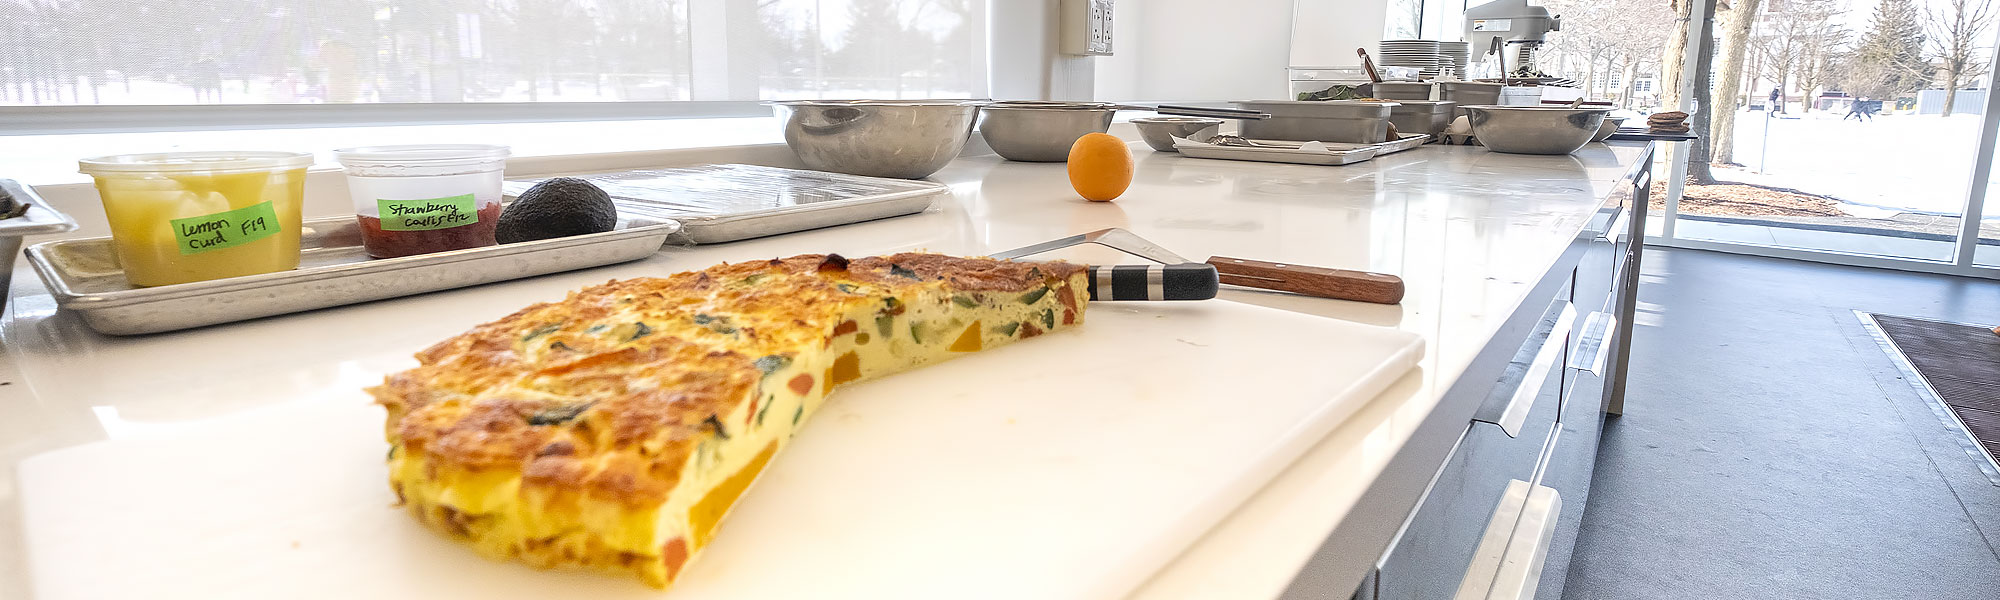 Countertop with large quiche